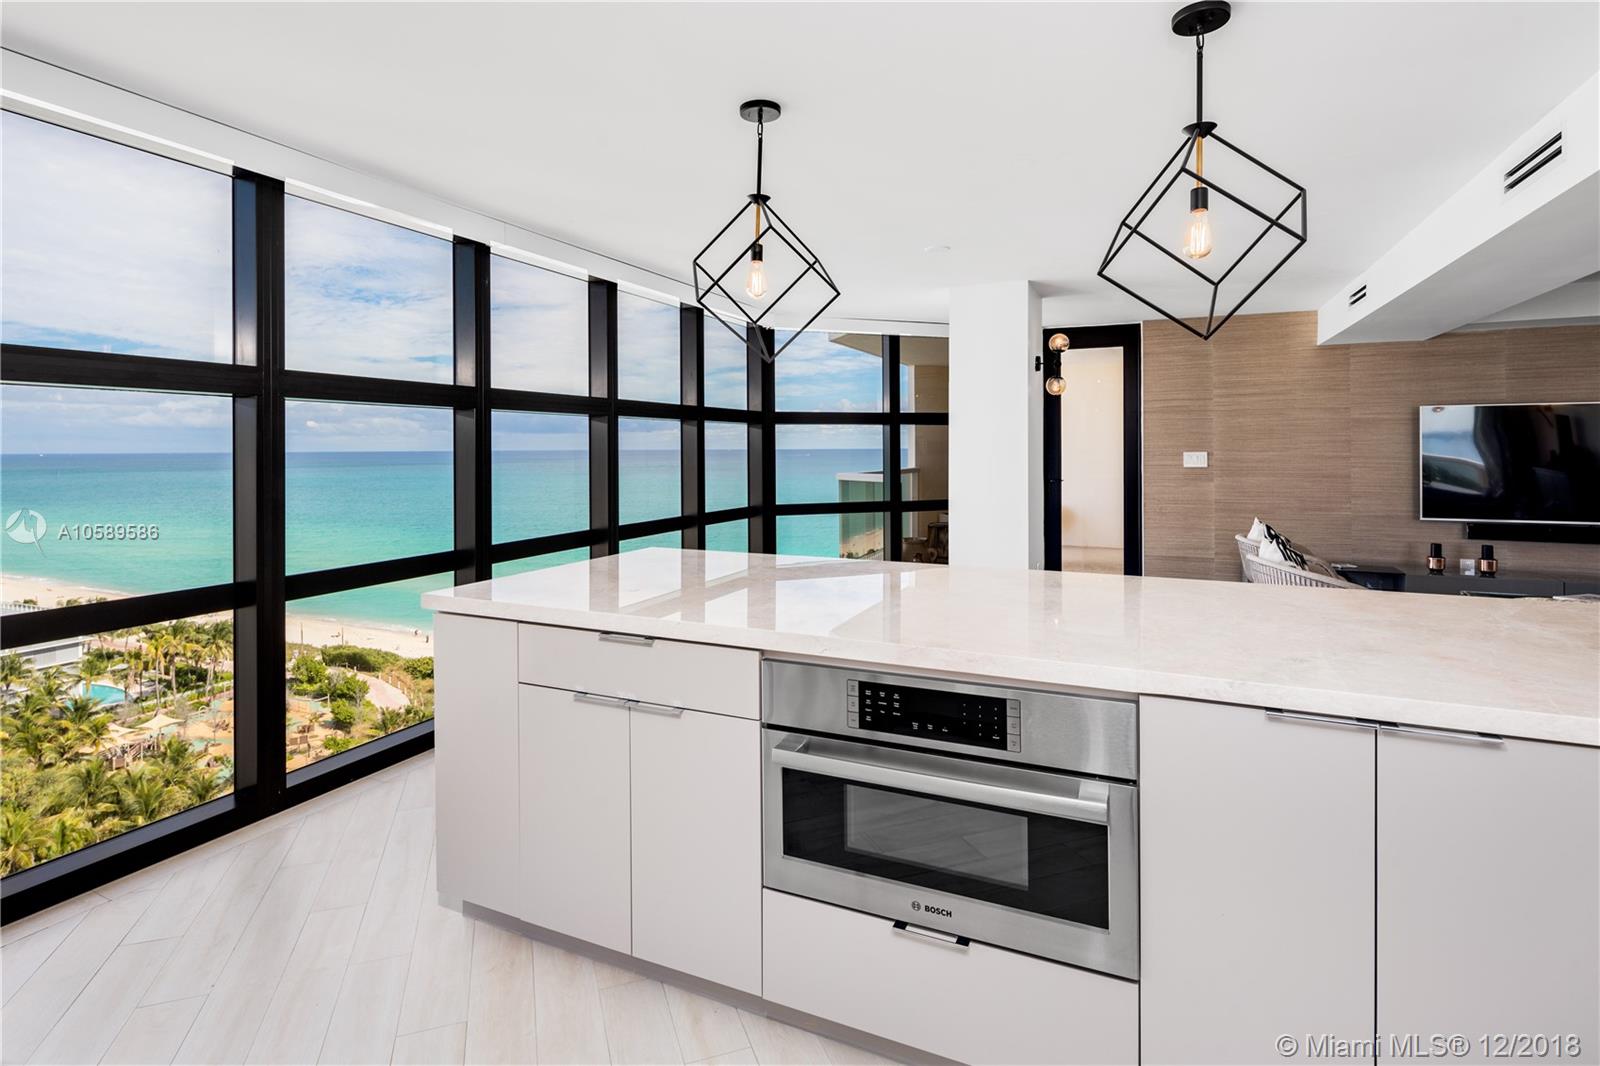 a kitchen with stainless steel appliances a stove a sink and a chandelier